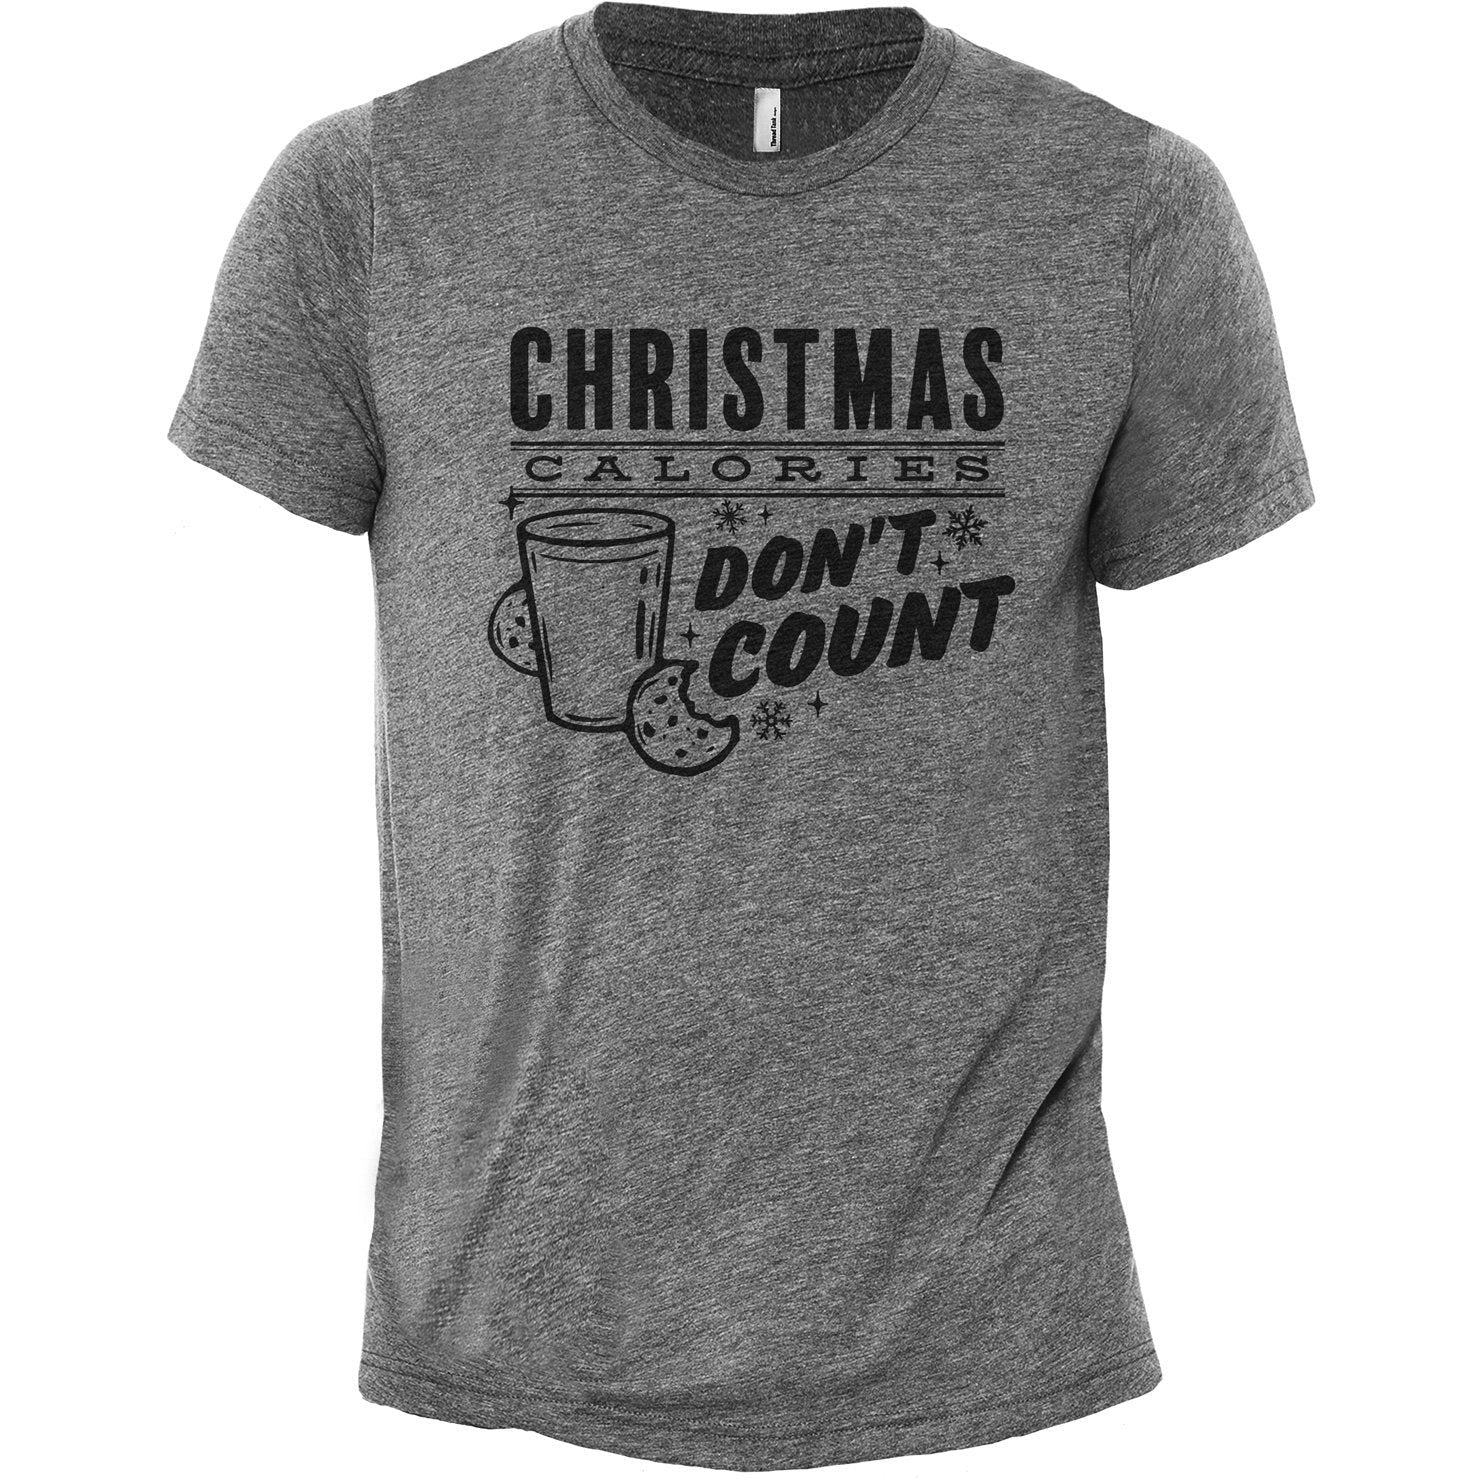 Christmas Calories Don't Count Heather Grey Printed Graphic Men's Crew T-Shirt Tee